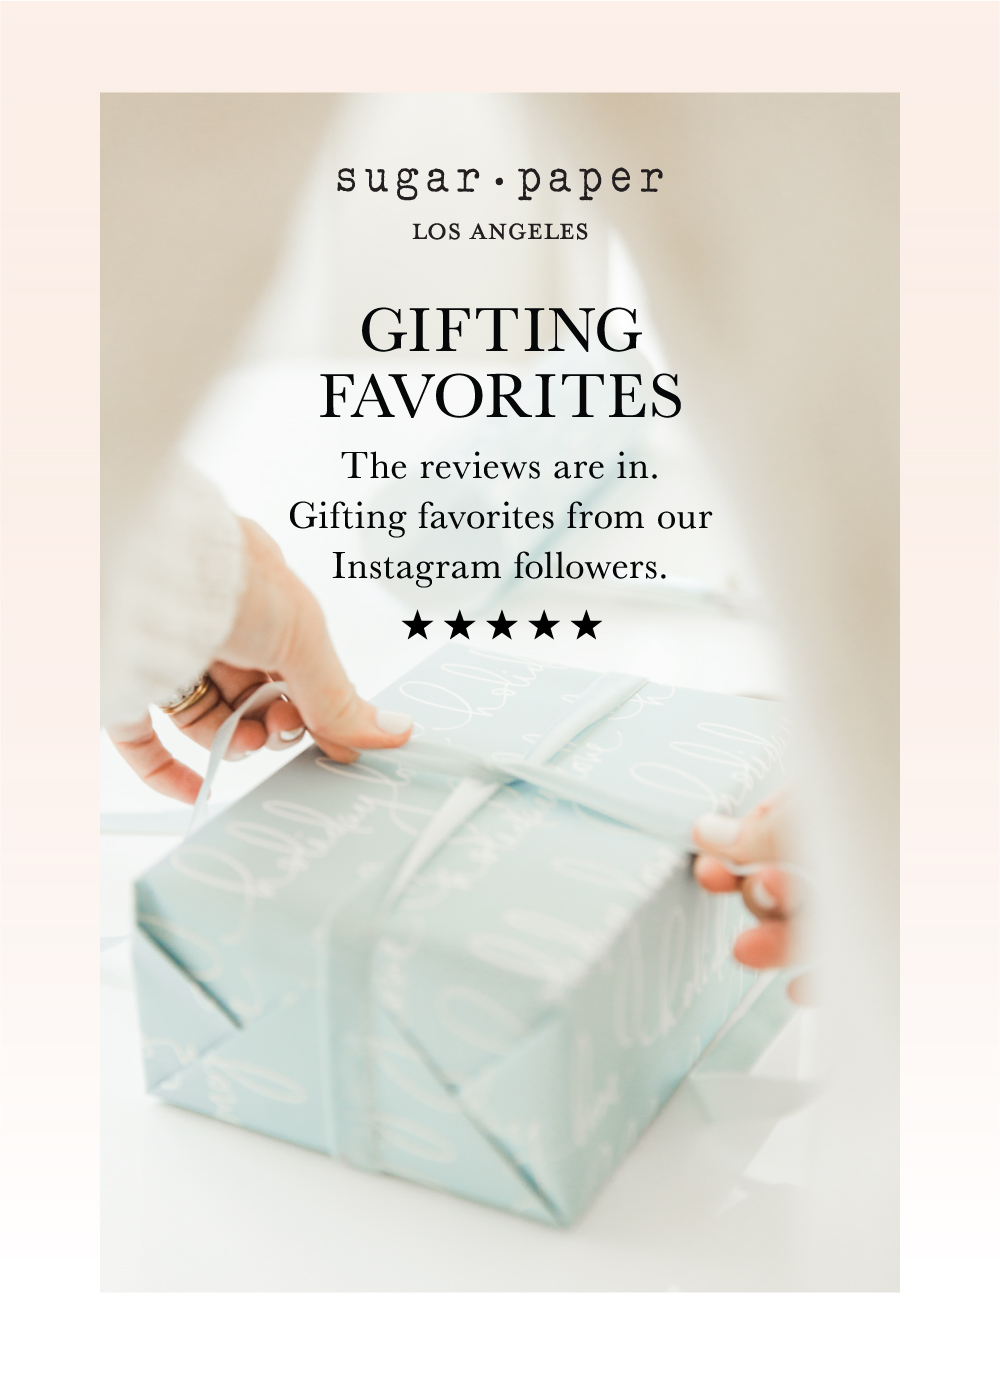 Gifting favorites. The reviews are in. Gifting favorite from our Instagram followers.